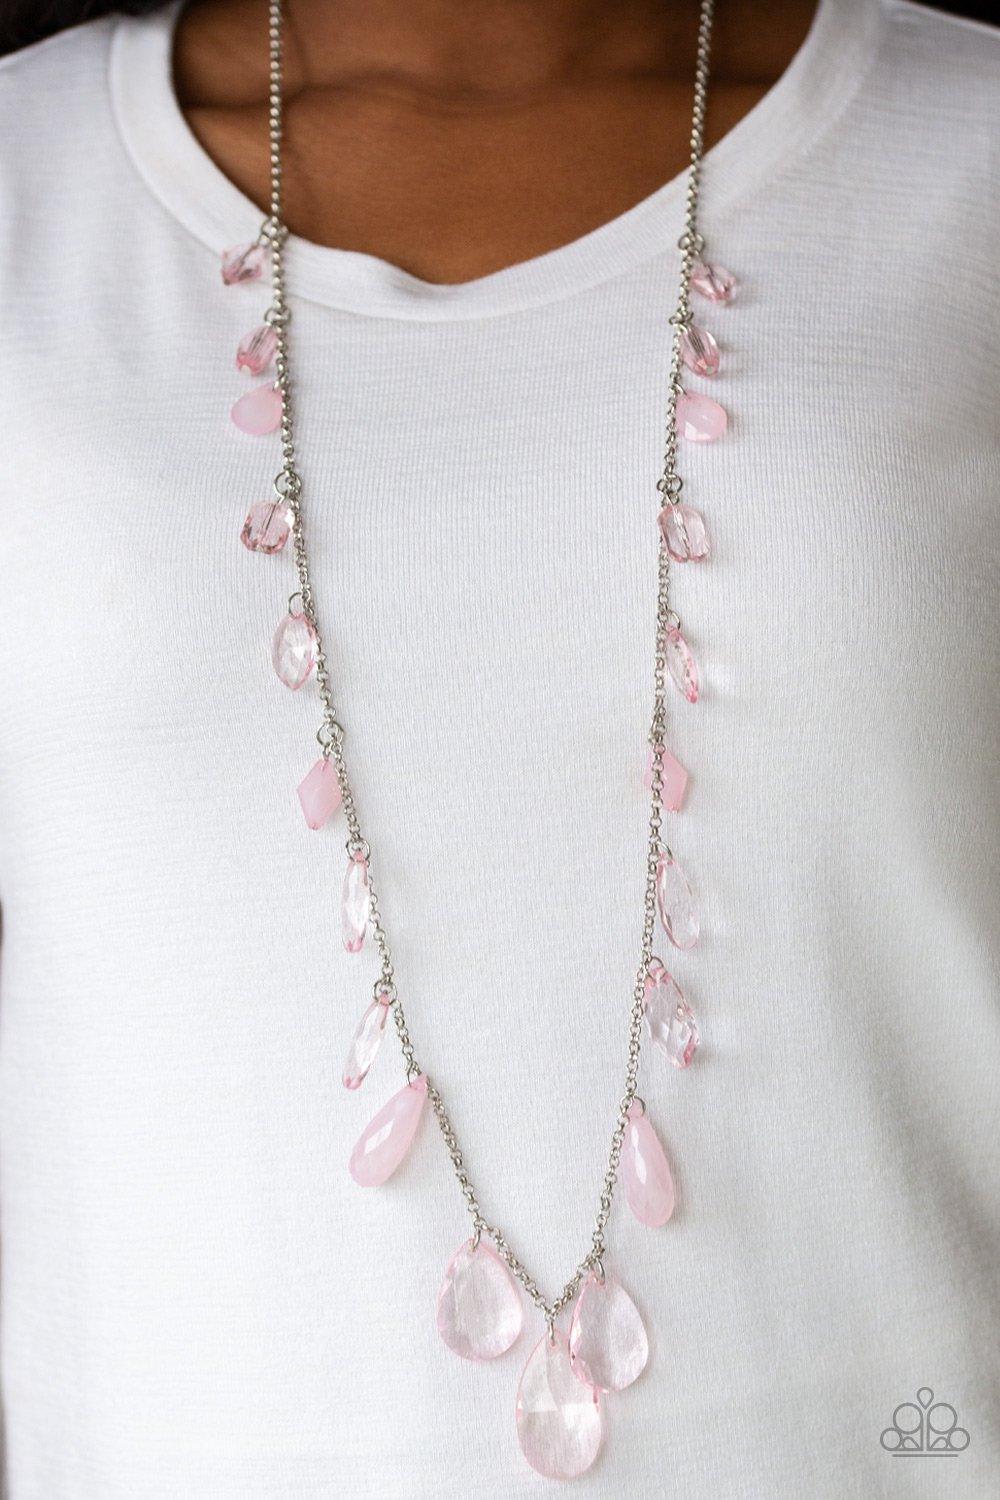 GLOW And Steady Wins The Race Pink Necklace - Jewelry By Brretta